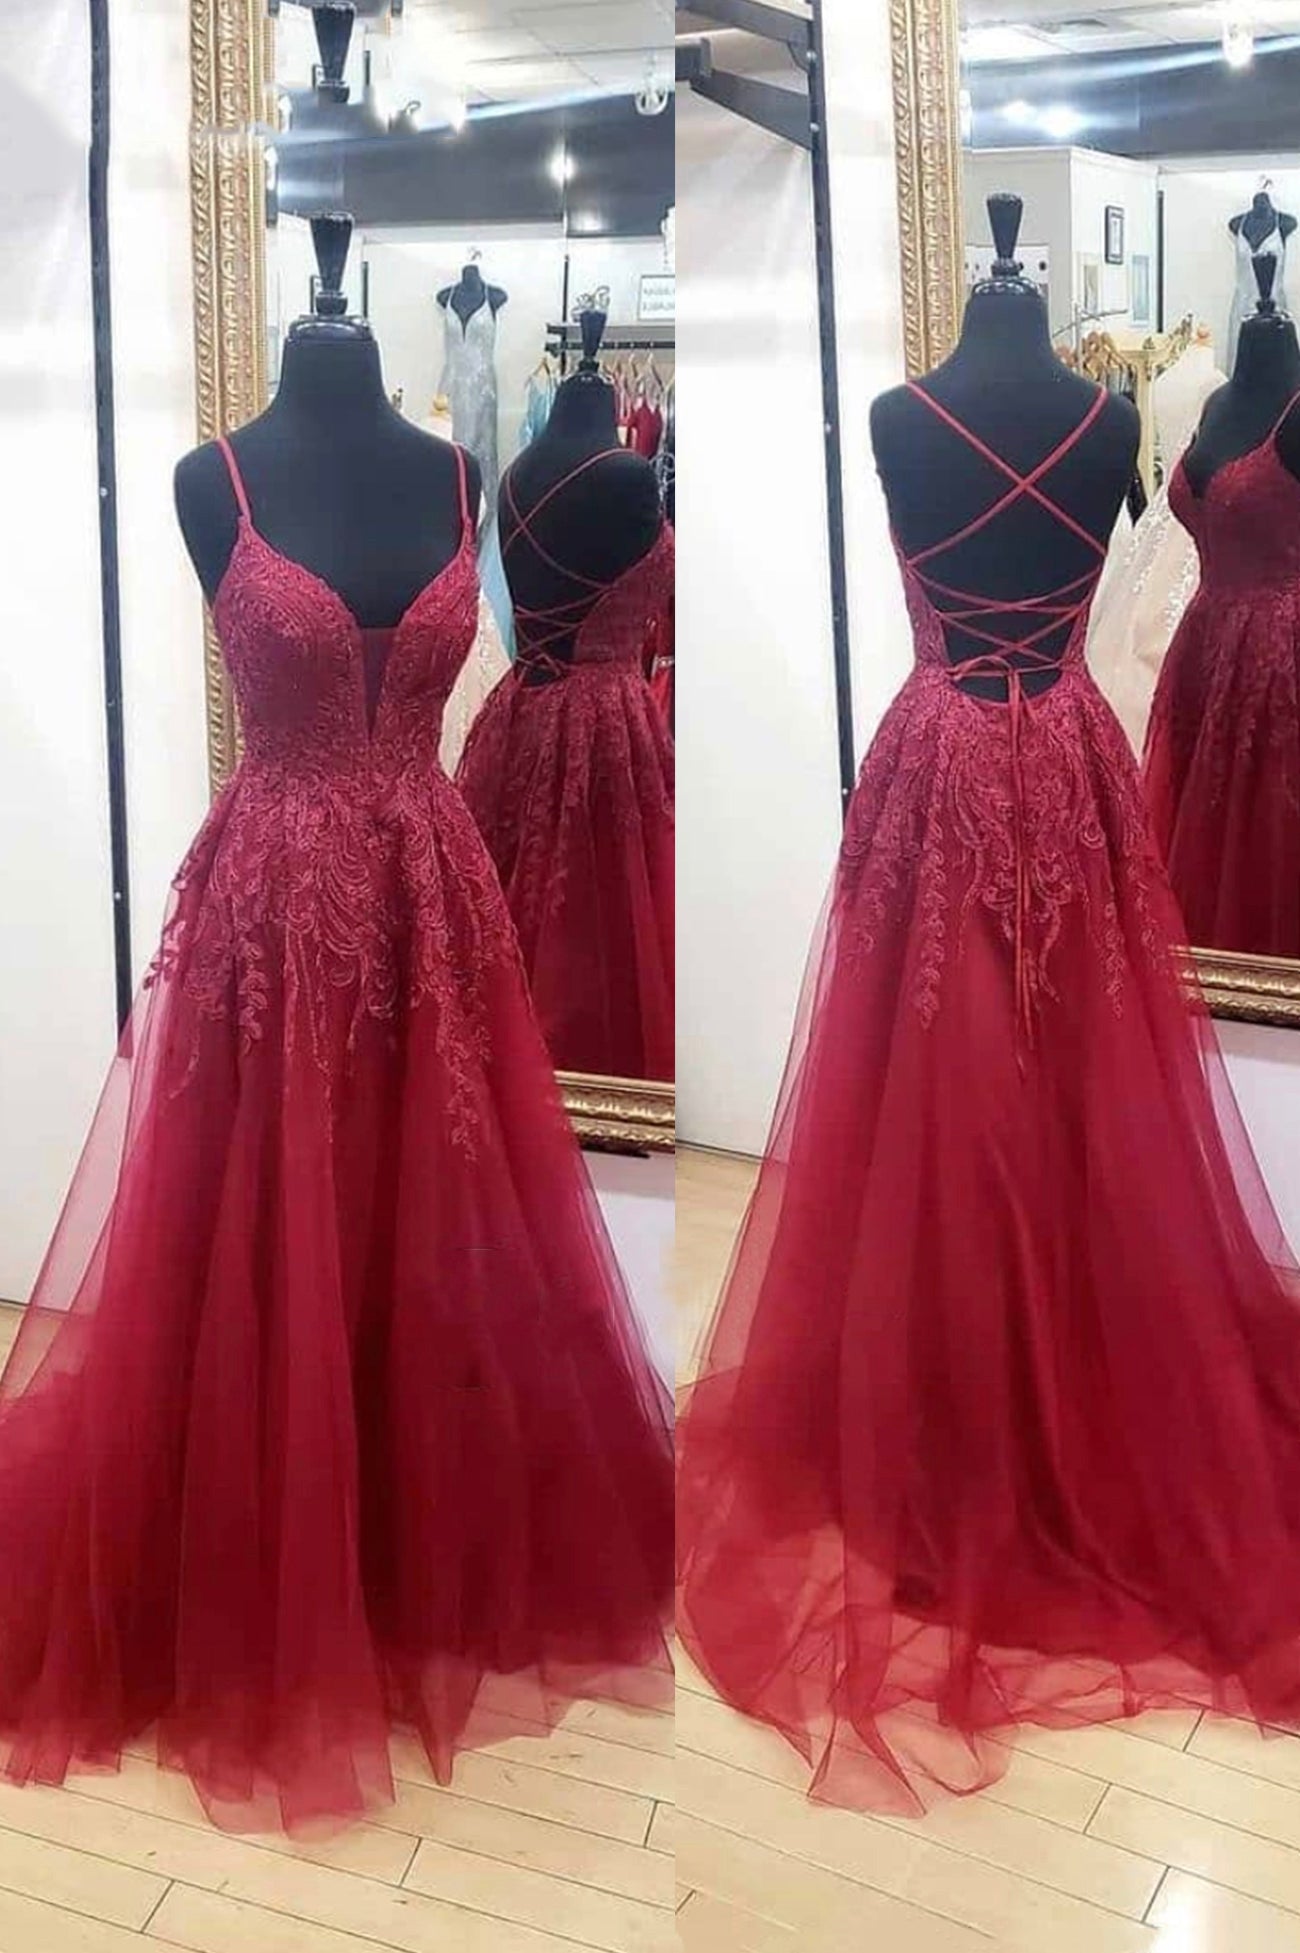 Ranch Dress, Burgundy Lace Long Prom Dresses, A-Line Backless Evening Dresses